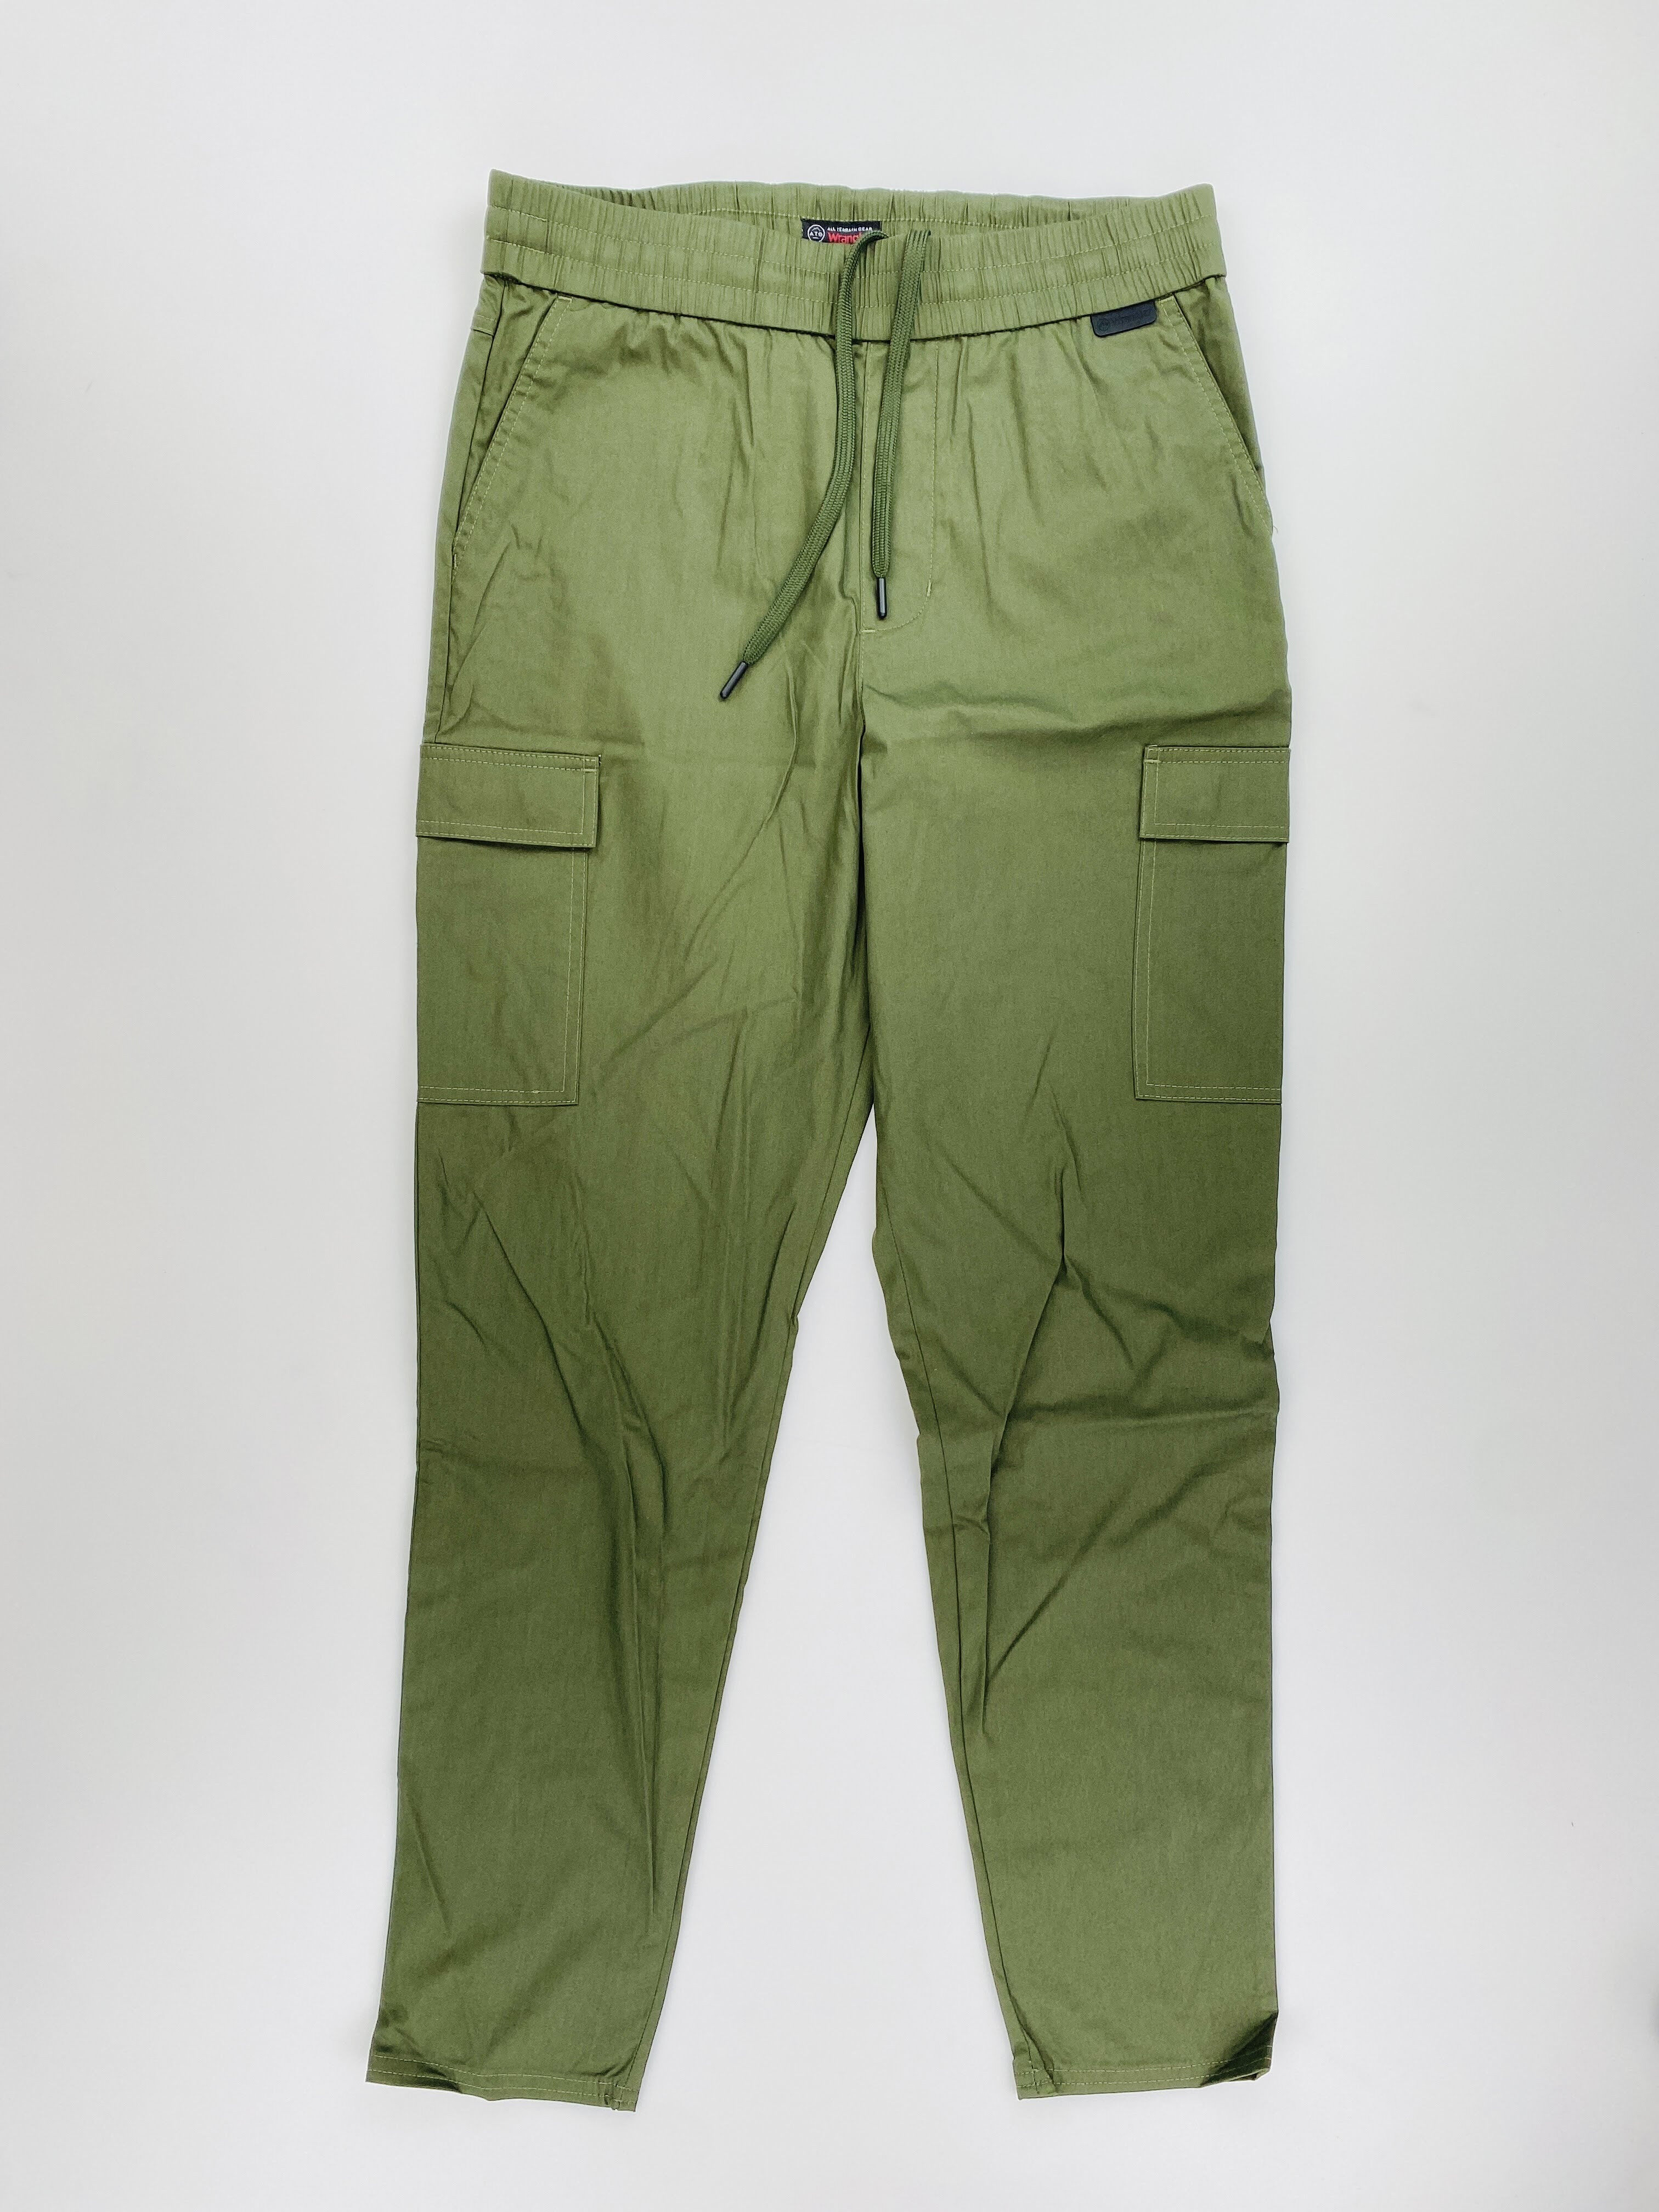 https://images.hardloop.fr/411507/wrangler-cargo-jogger-second-hand-walking-trousers-womens-olive-green-us-28.jpg?w=auto&h=auto&q=80